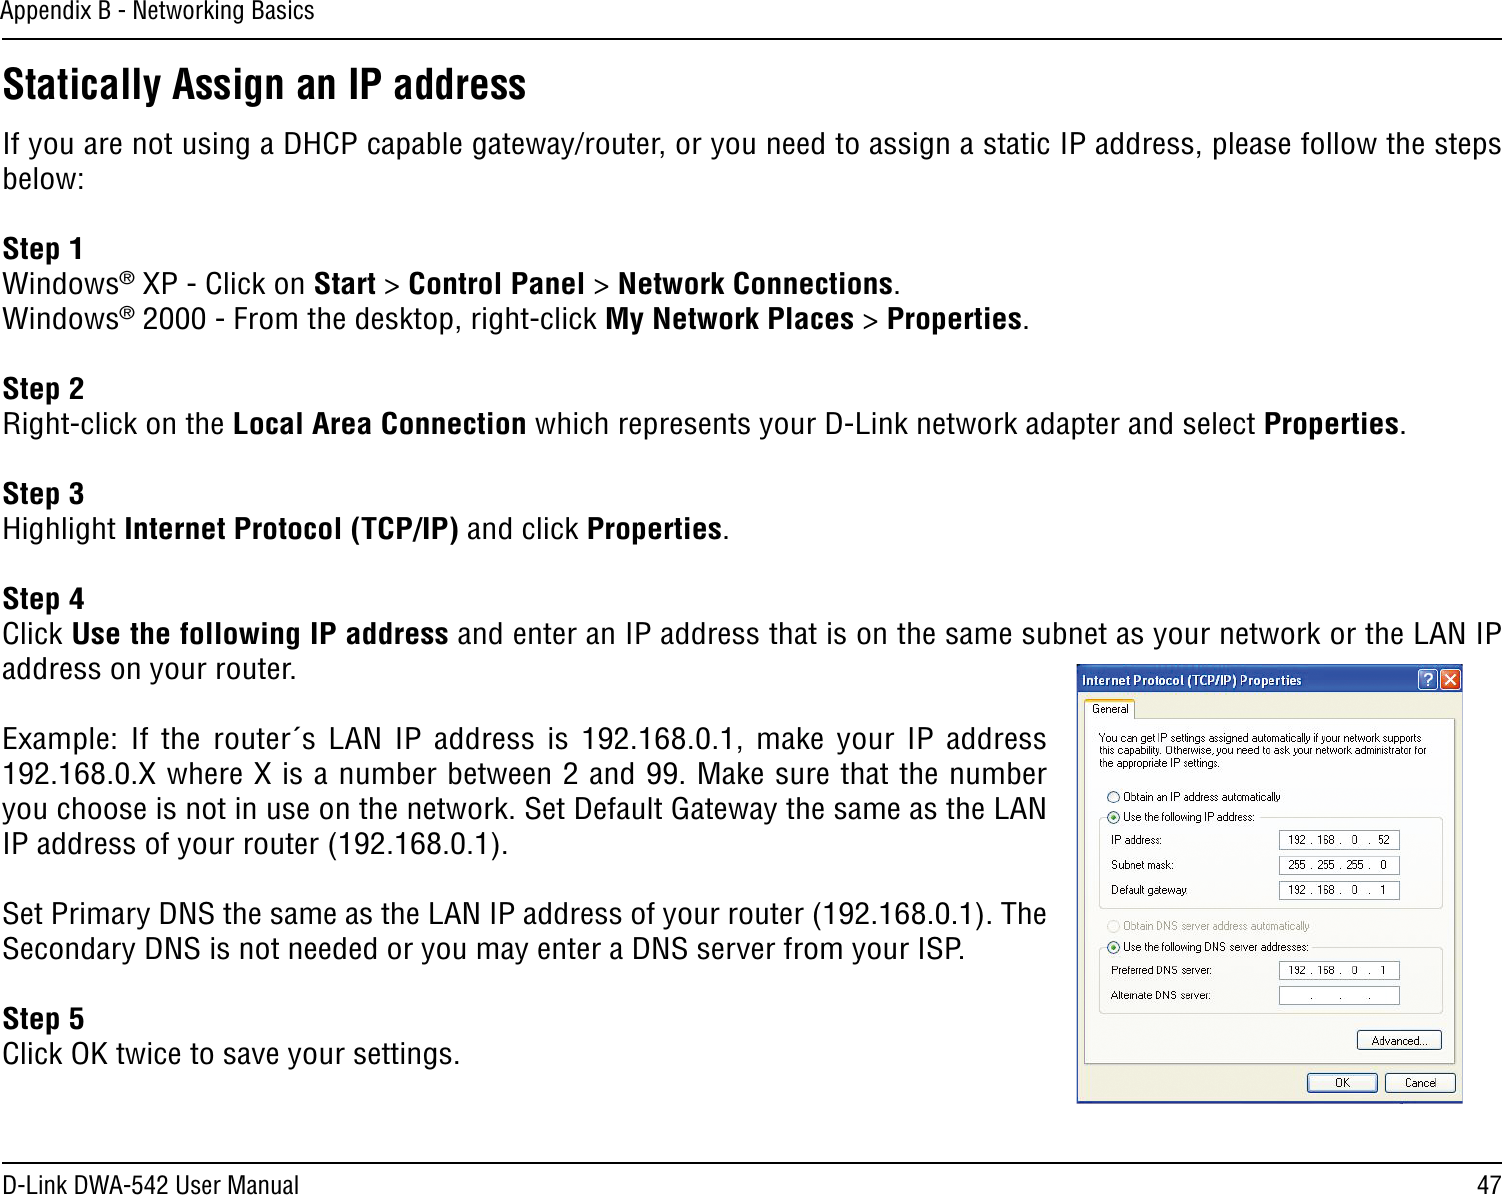 47D-Link DWA-542 User ManualAppendix B - Networking BasicsStatically Assign an IP addressIf you are not using a DHCP capable gateway/router, or you need to assign a static IP address, please follow the steps below:Step 1Windows® XP - Click on Start &gt; Control Panel &gt; Network Connections.Windows® 2000 - From the desktop, right-click My Network Places &gt; Properties.Step 2Right-click on the Local Area Connection which represents your D-Link network adapter and select Properties.Step 3Highlight Internet Protocol (TCP/IP) and click Properties.Step 4Click Use the following IP address and enter an IP address that is on the same subnet as your network or the LAN IP address on your router. Example:  If  the router´s LAN  IP  address  is  192.168.0.1,  make  your  IP  address 192.168.0.X where X is a number between 2 and 99. Make sure that the number you choose is not in use on the network. Set Default Gateway the same as the LAN IP address of your router (192.168.0.1). Set Primary DNS the same as the LAN IP address of your router (192.168.0.1). The Secondary DNS is not needed or you may enter a DNS server from your ISP.Step 5Click OK twice to save your settings.